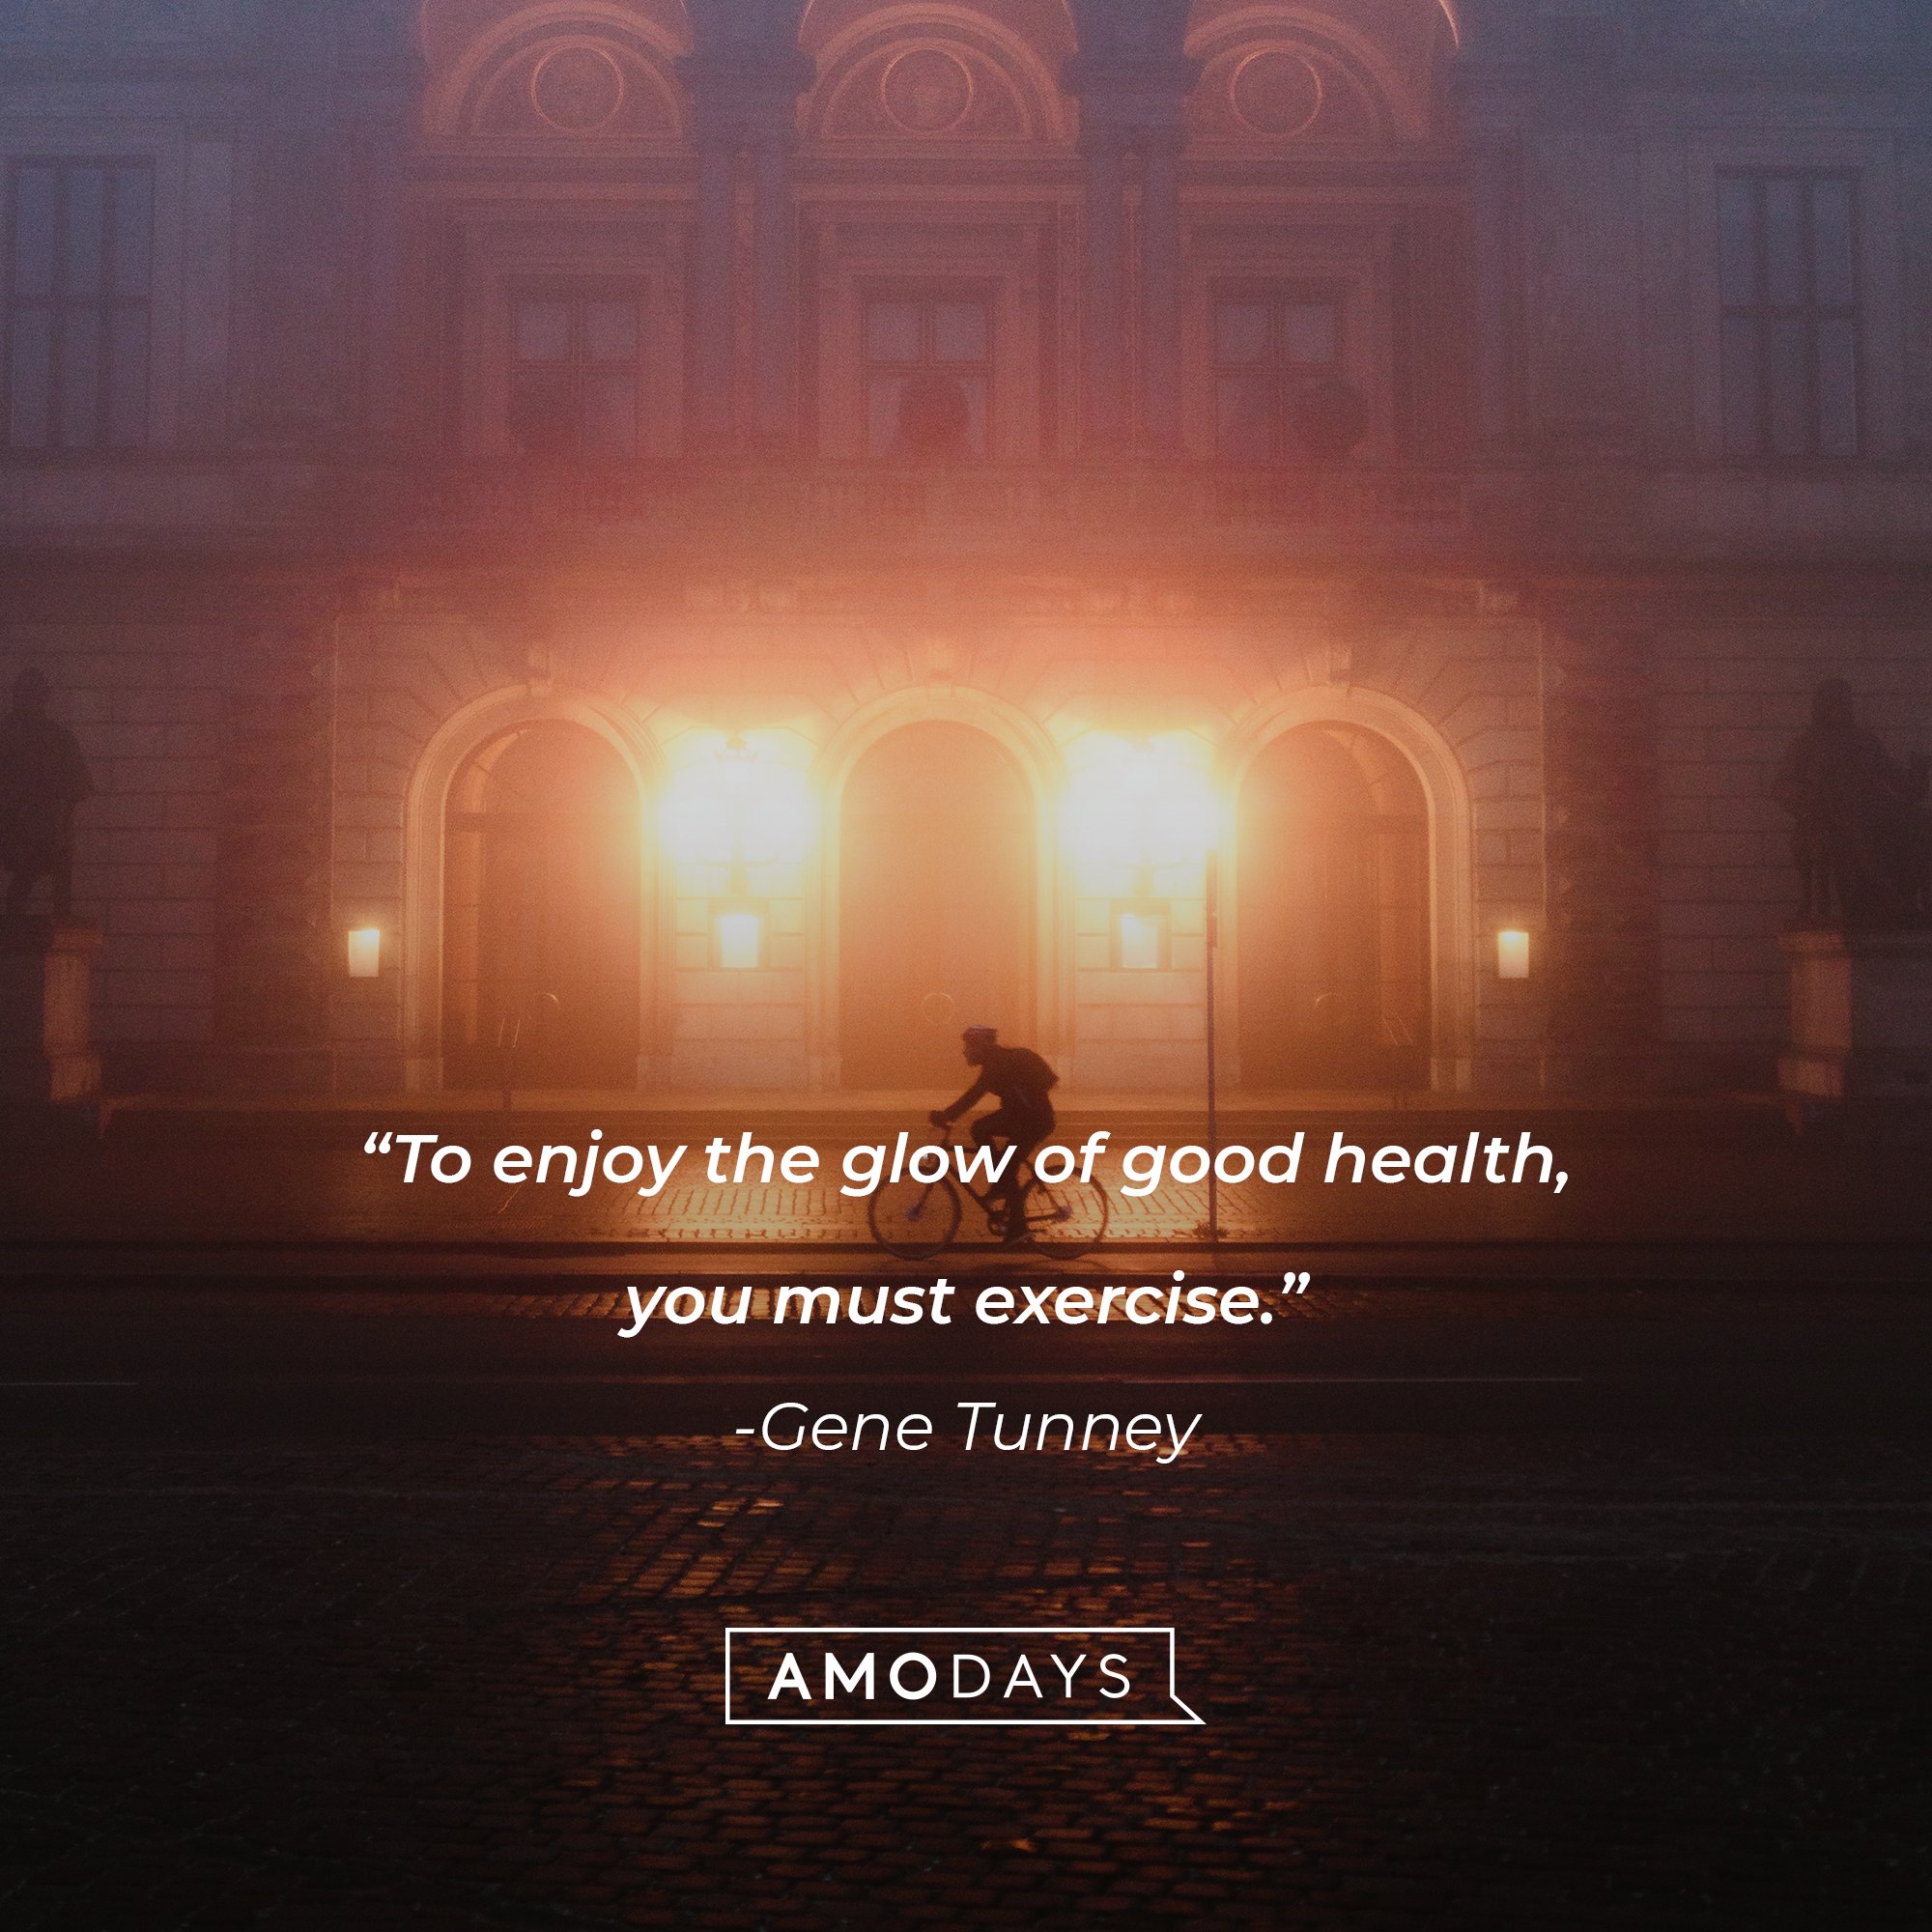 Gene Tunney's quote: "To enjoy the glow of good health, you must exercise." | Image: AmoDays